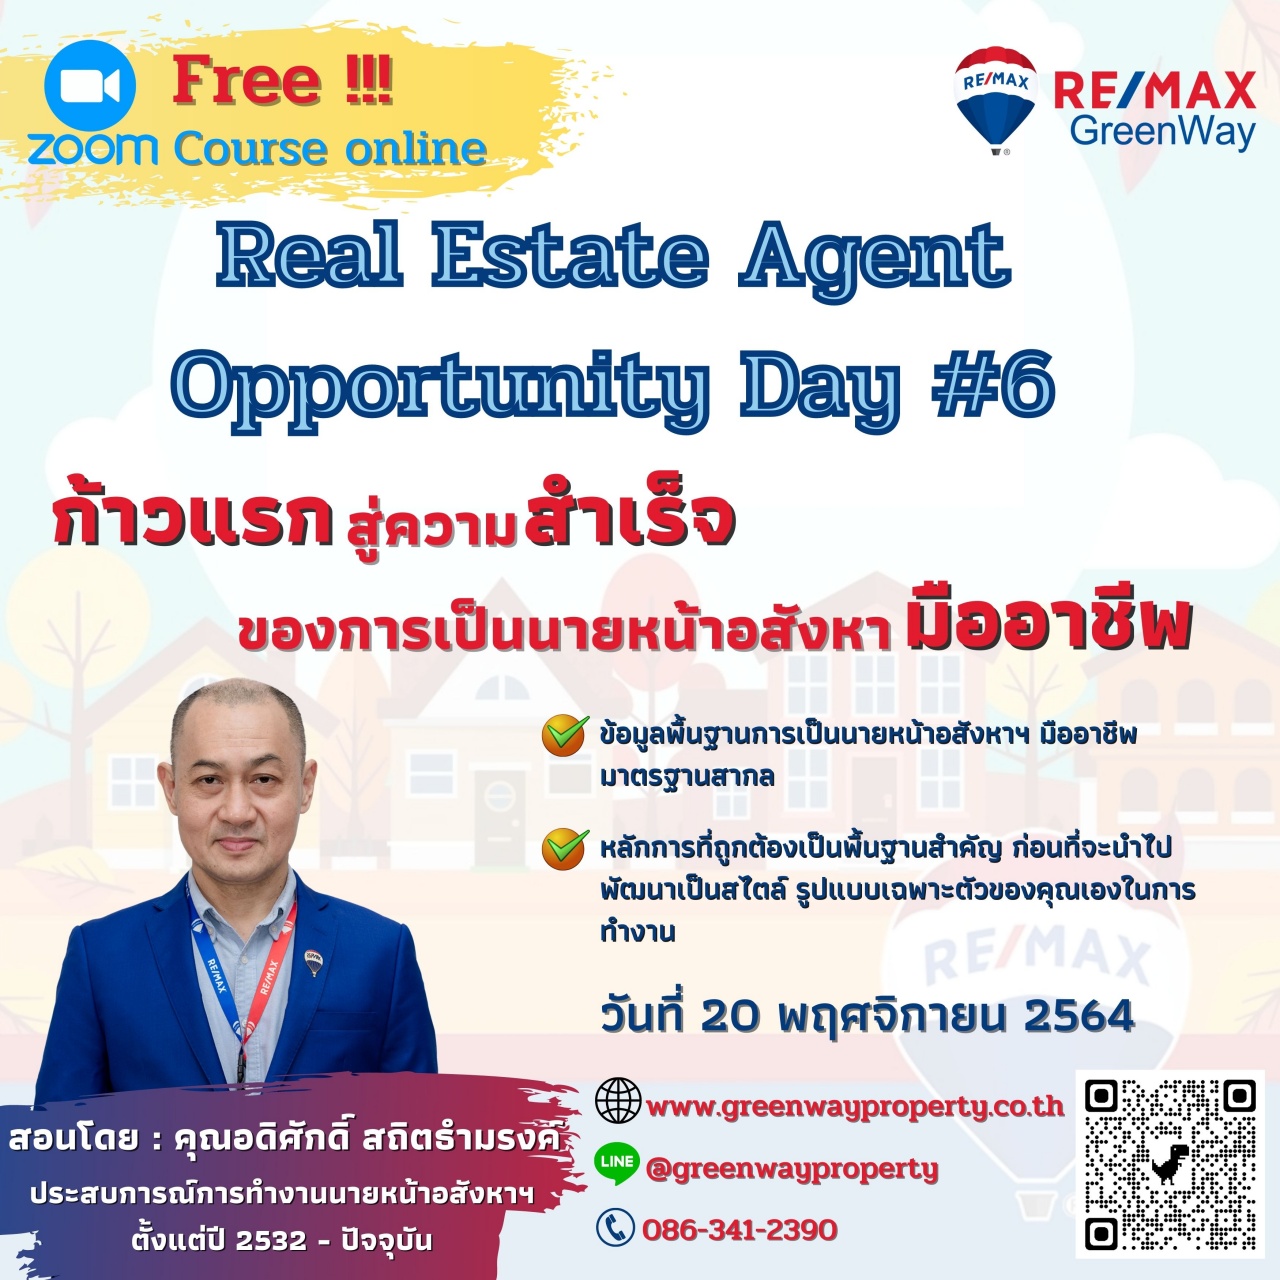 Real Estate Agent Opportunity Day ครั้งที่ 6